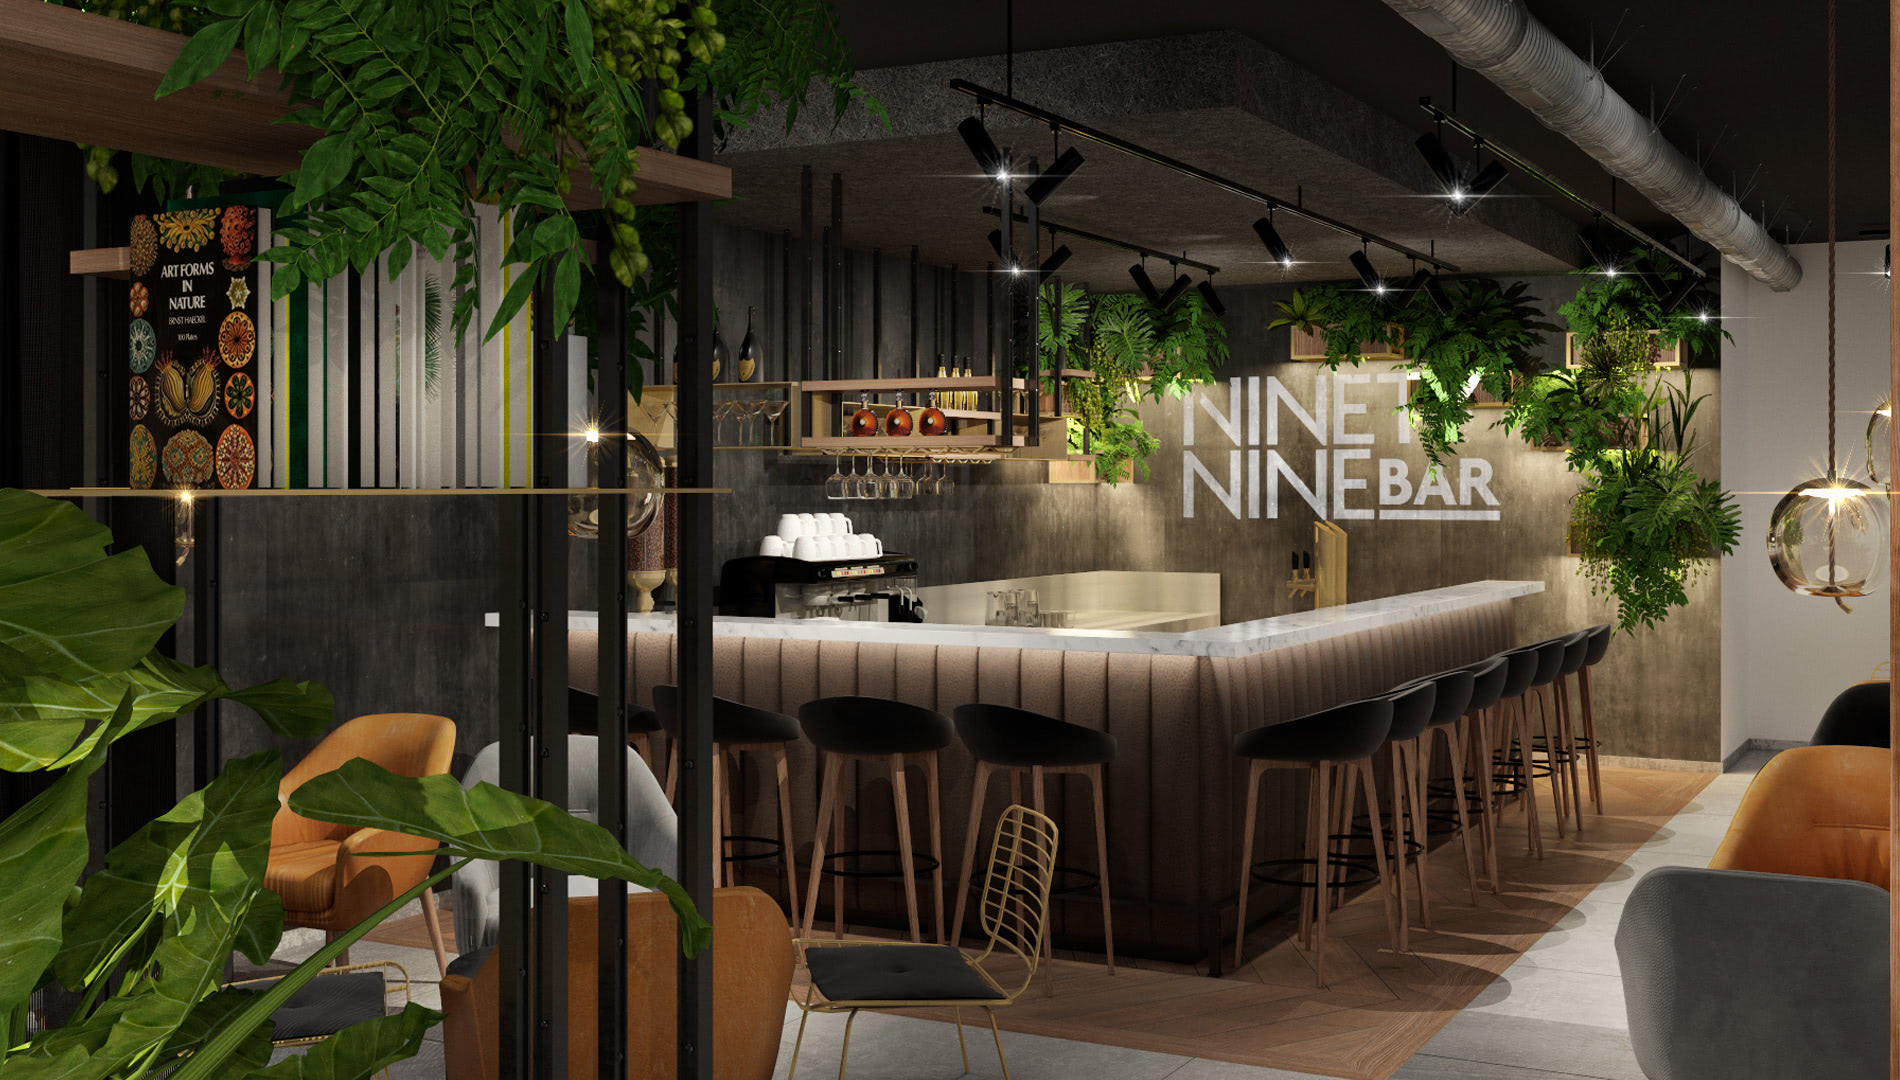 Destinationsentwicklung Ninety Nine Hotels Wuppertal Hotel Design Bar Lounge Going Places